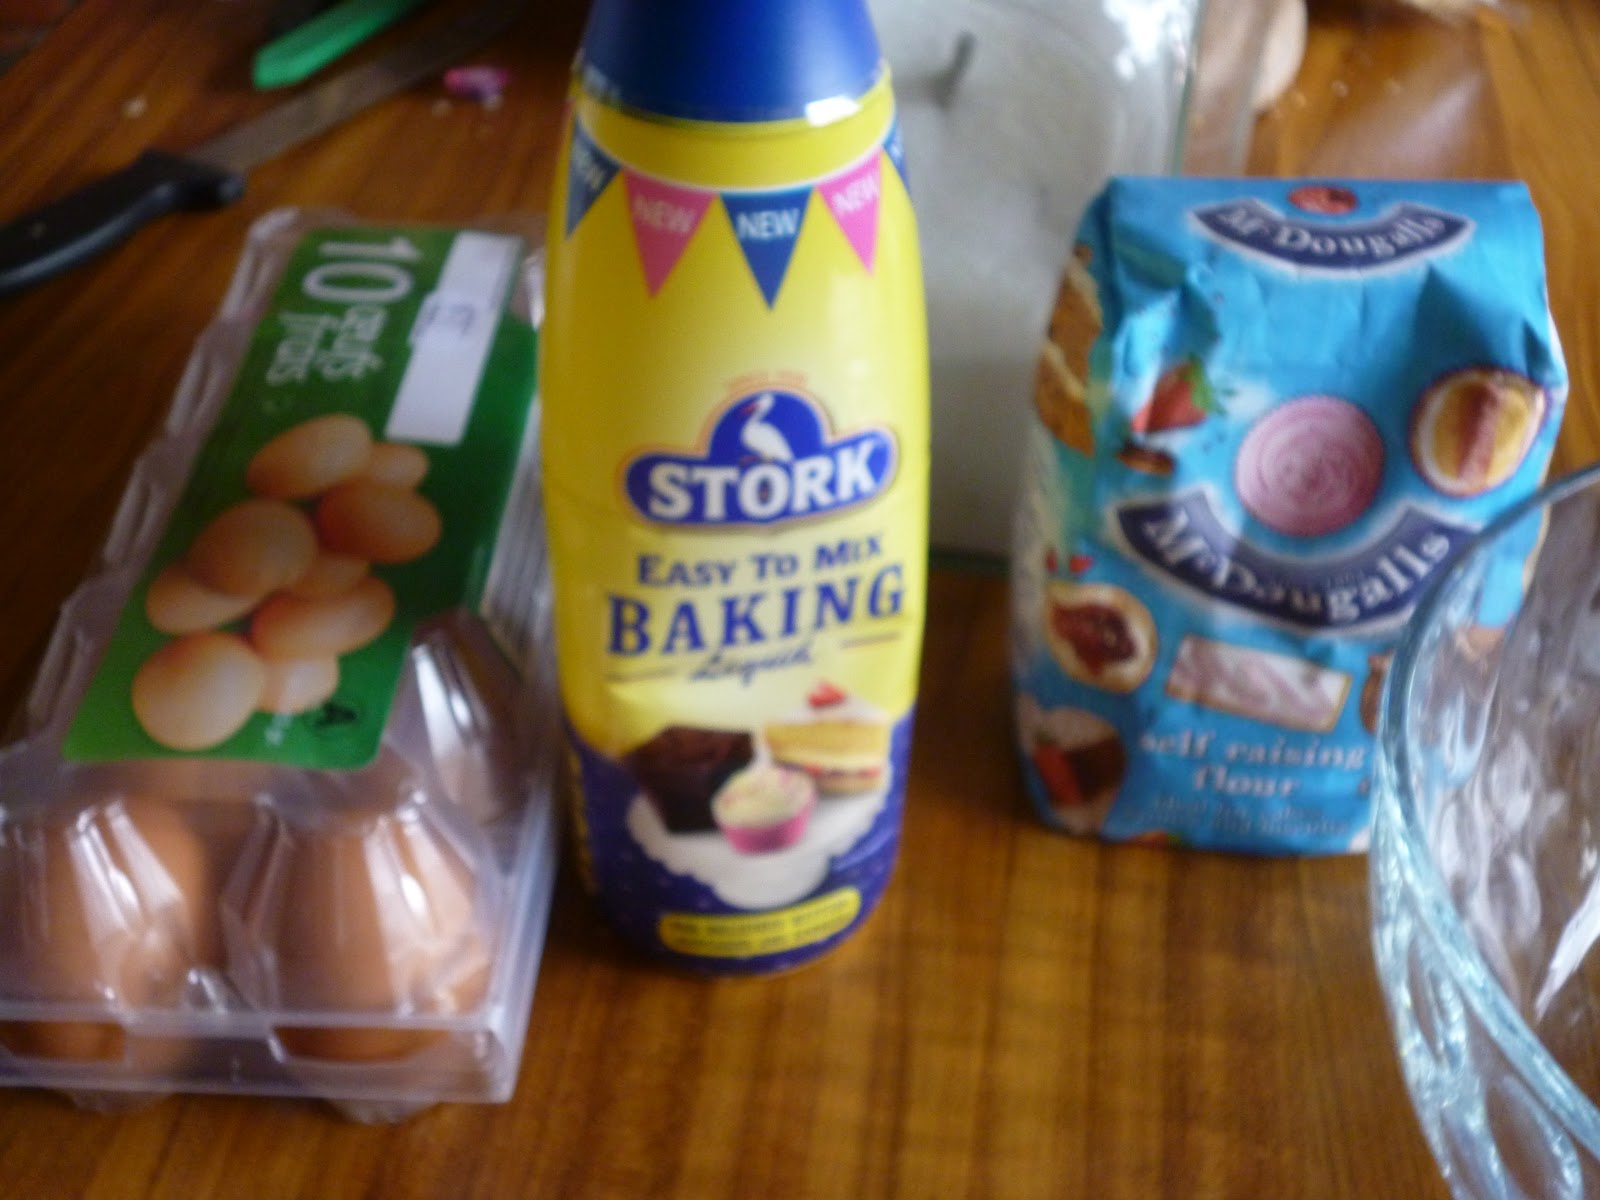 Madhouse Family Reviews Stork Easy To Mix Baking Liquid